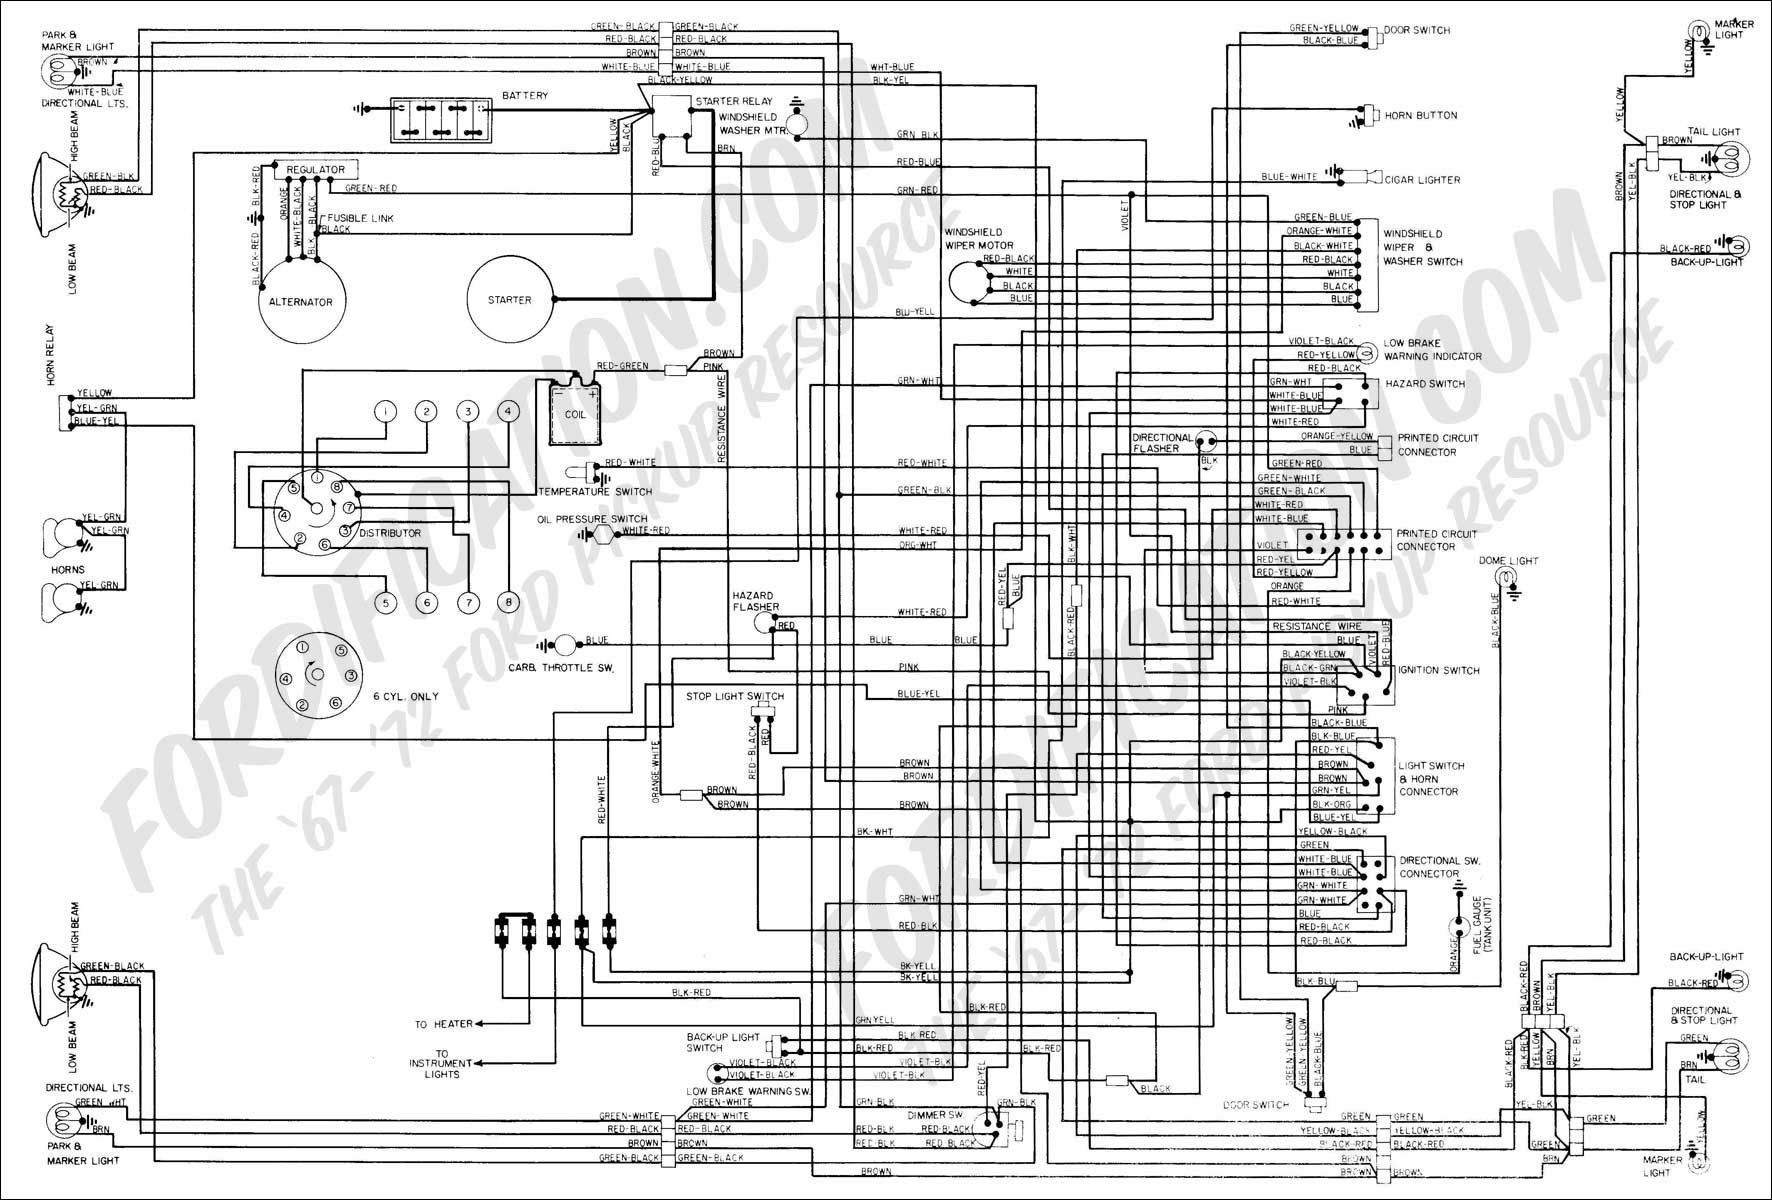 2005 Ford F150 Wiring Harness - Wiring Diagram Detailed - Ford F150 Wiring Harness Diagram